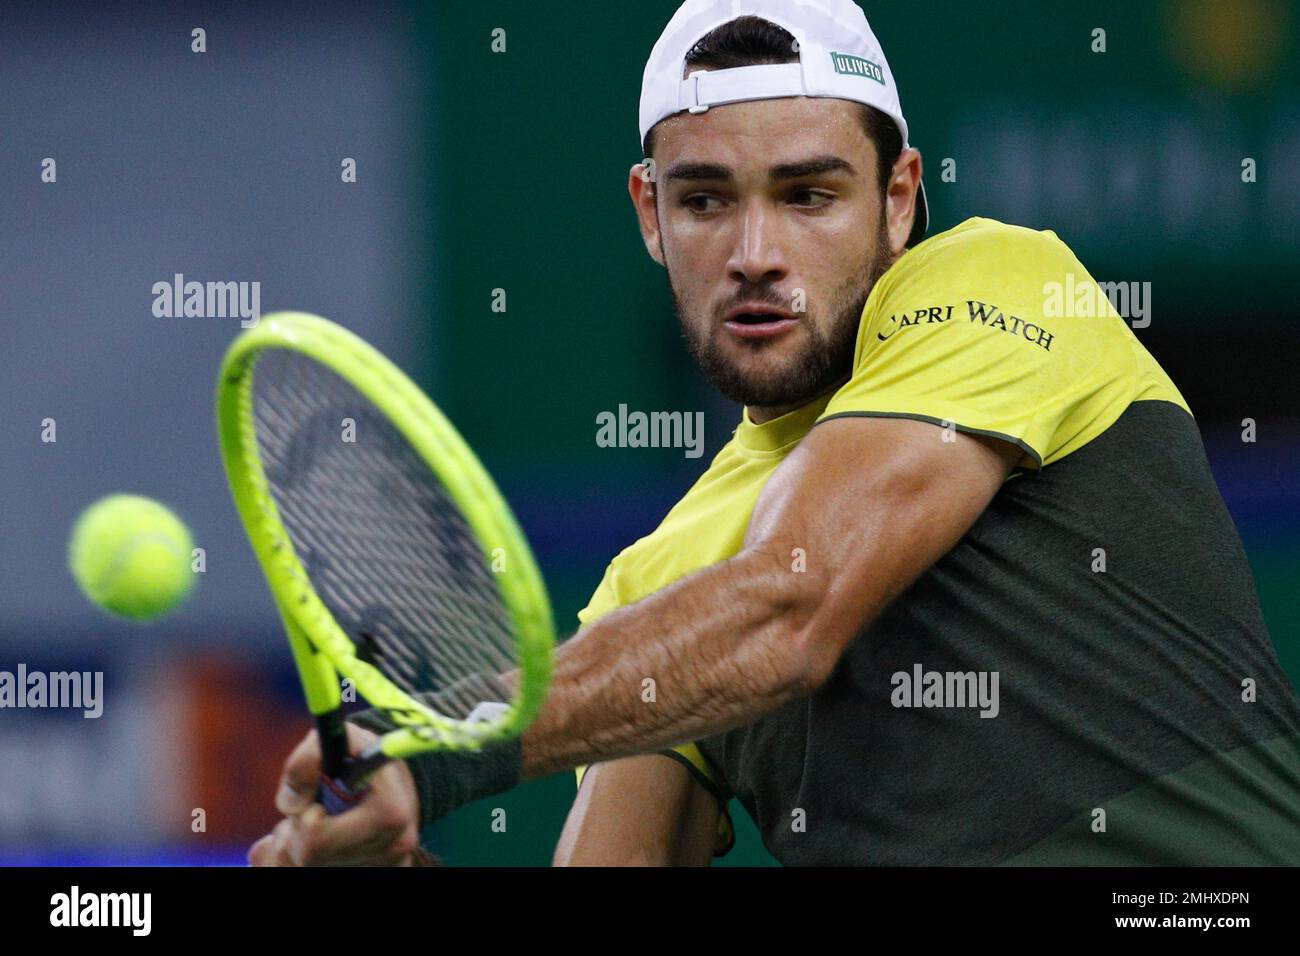 Matteo Berrettini of Italy hits a return shot against Dominic Thiem of Austria in the mens singles quarterfinals match at the Shanghai Masters tennis tournament at Qizhong Forest Sports City Tennis Center